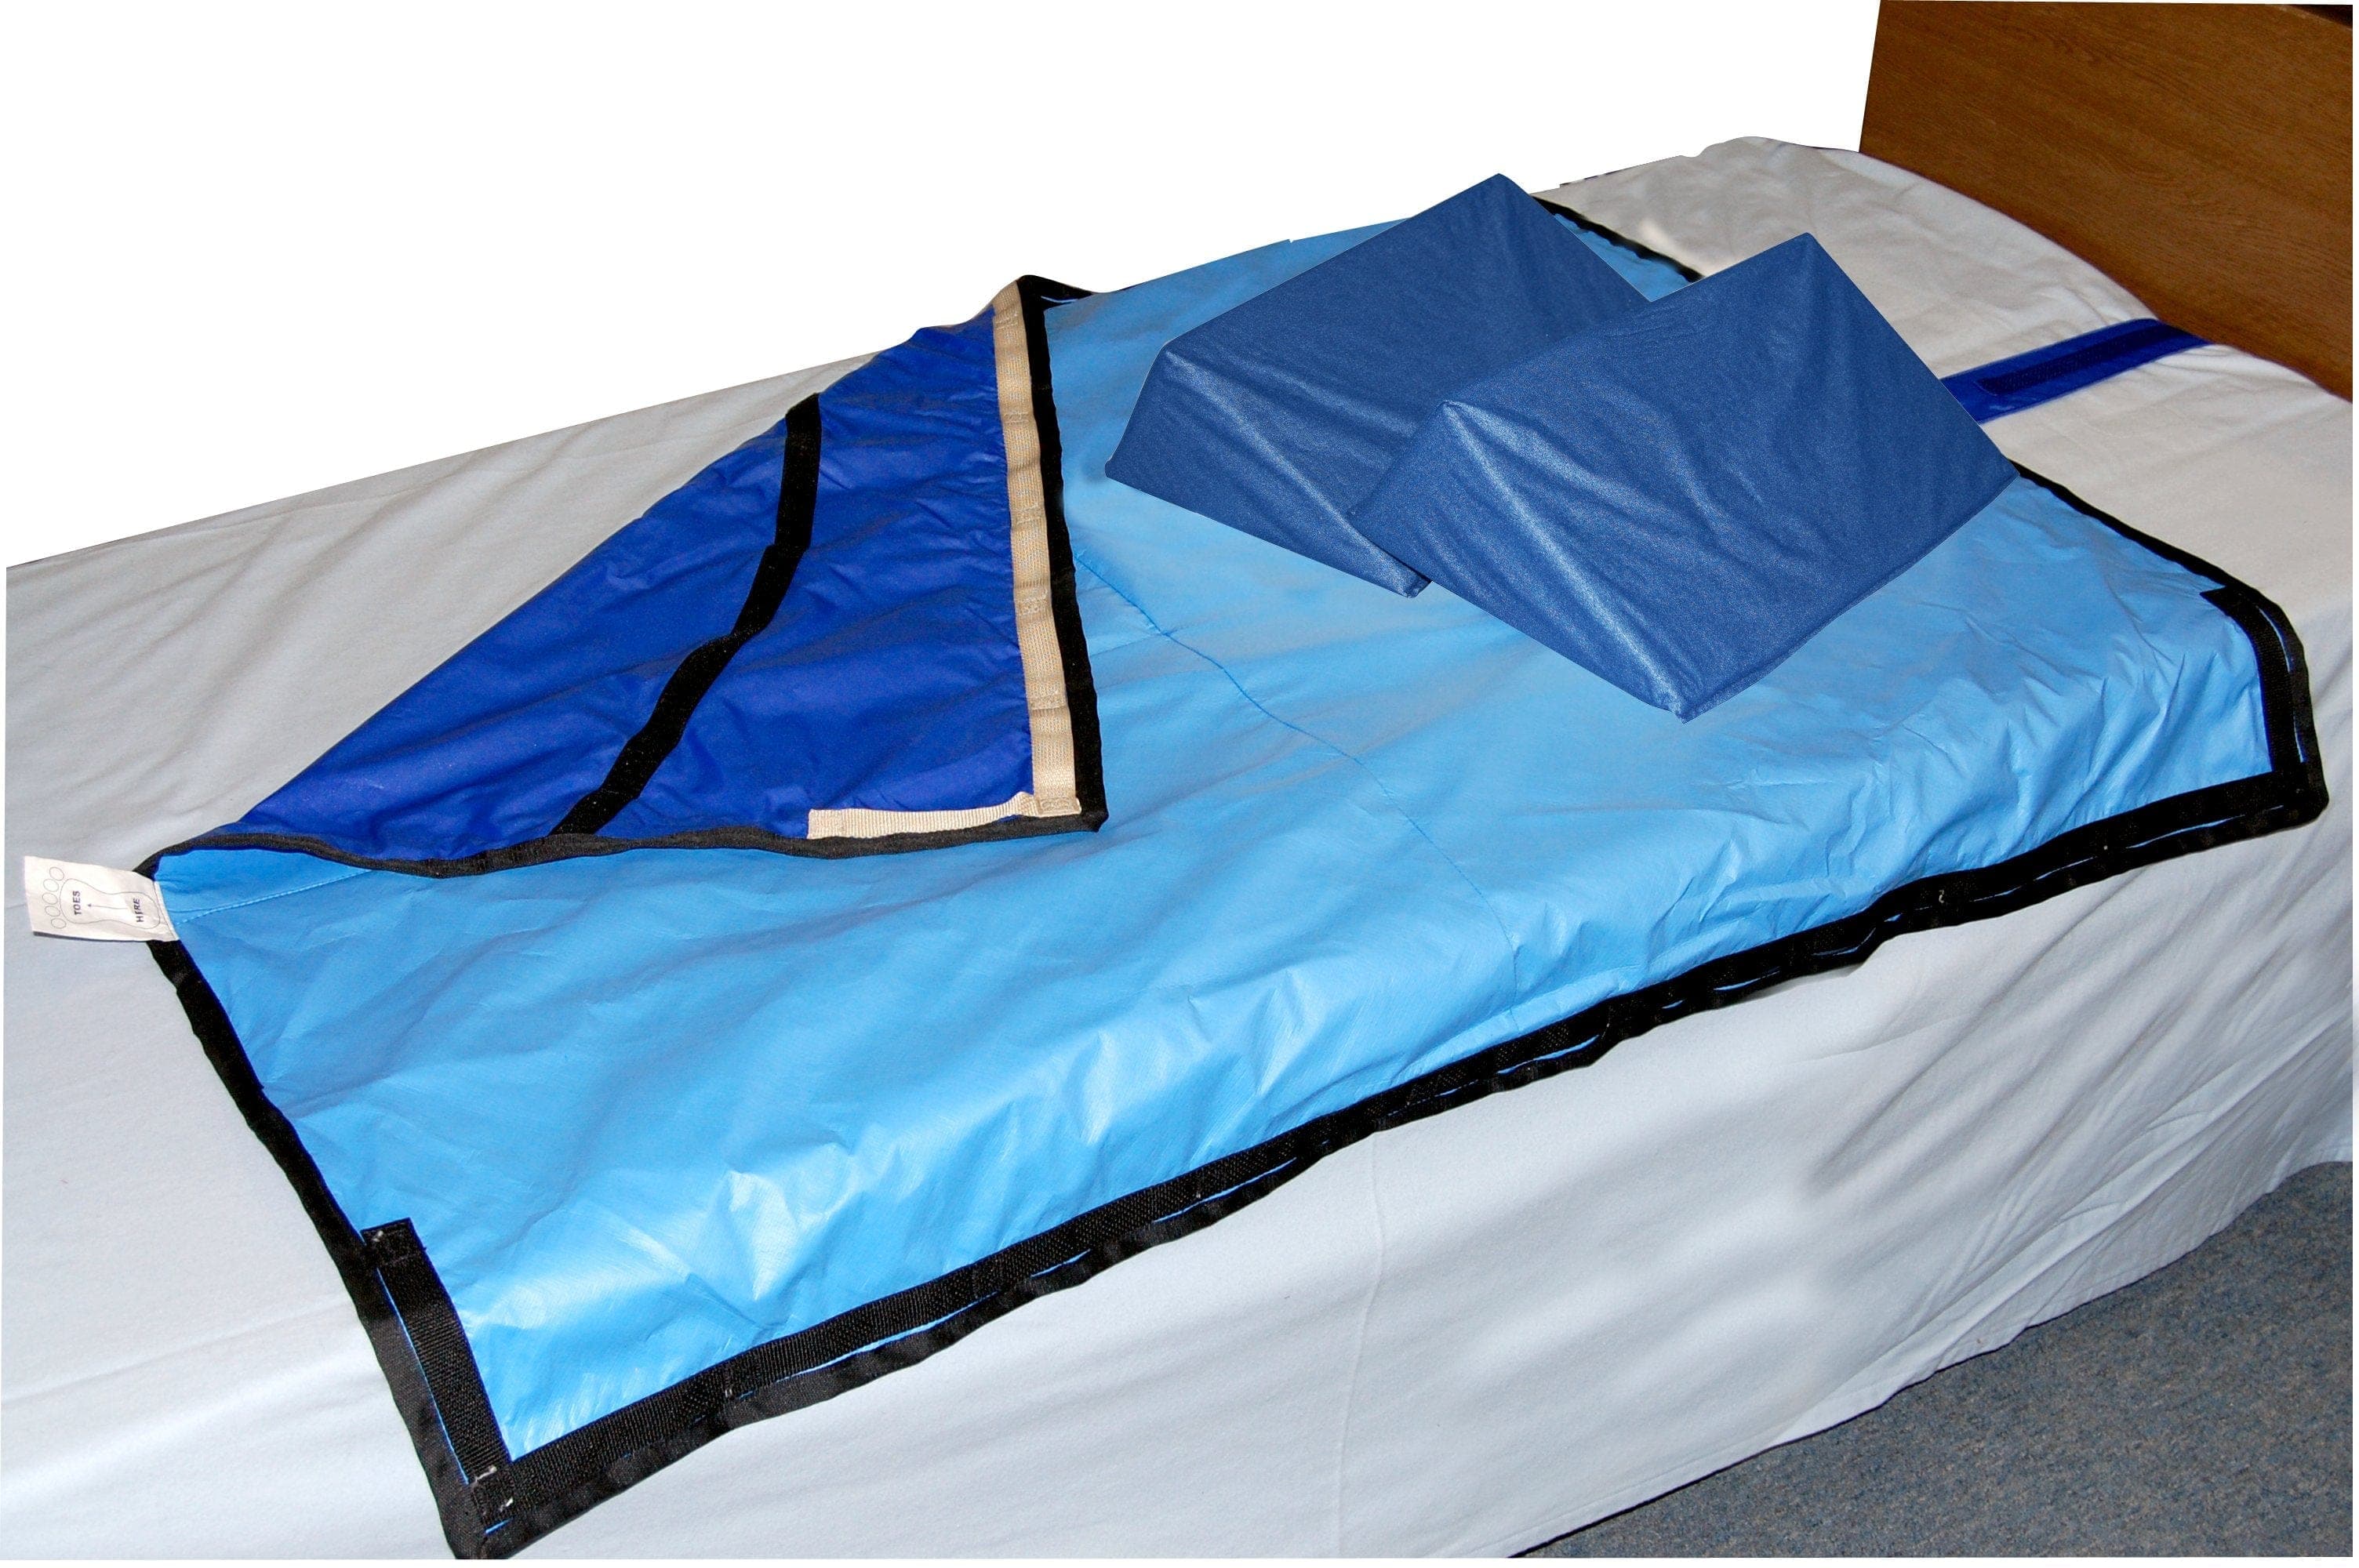 SkilCare Bed Positioning Nylon / 38" SkilCare 30-Degree Bed System with 50x38" Nylon Sheet & Two 16" Wedges